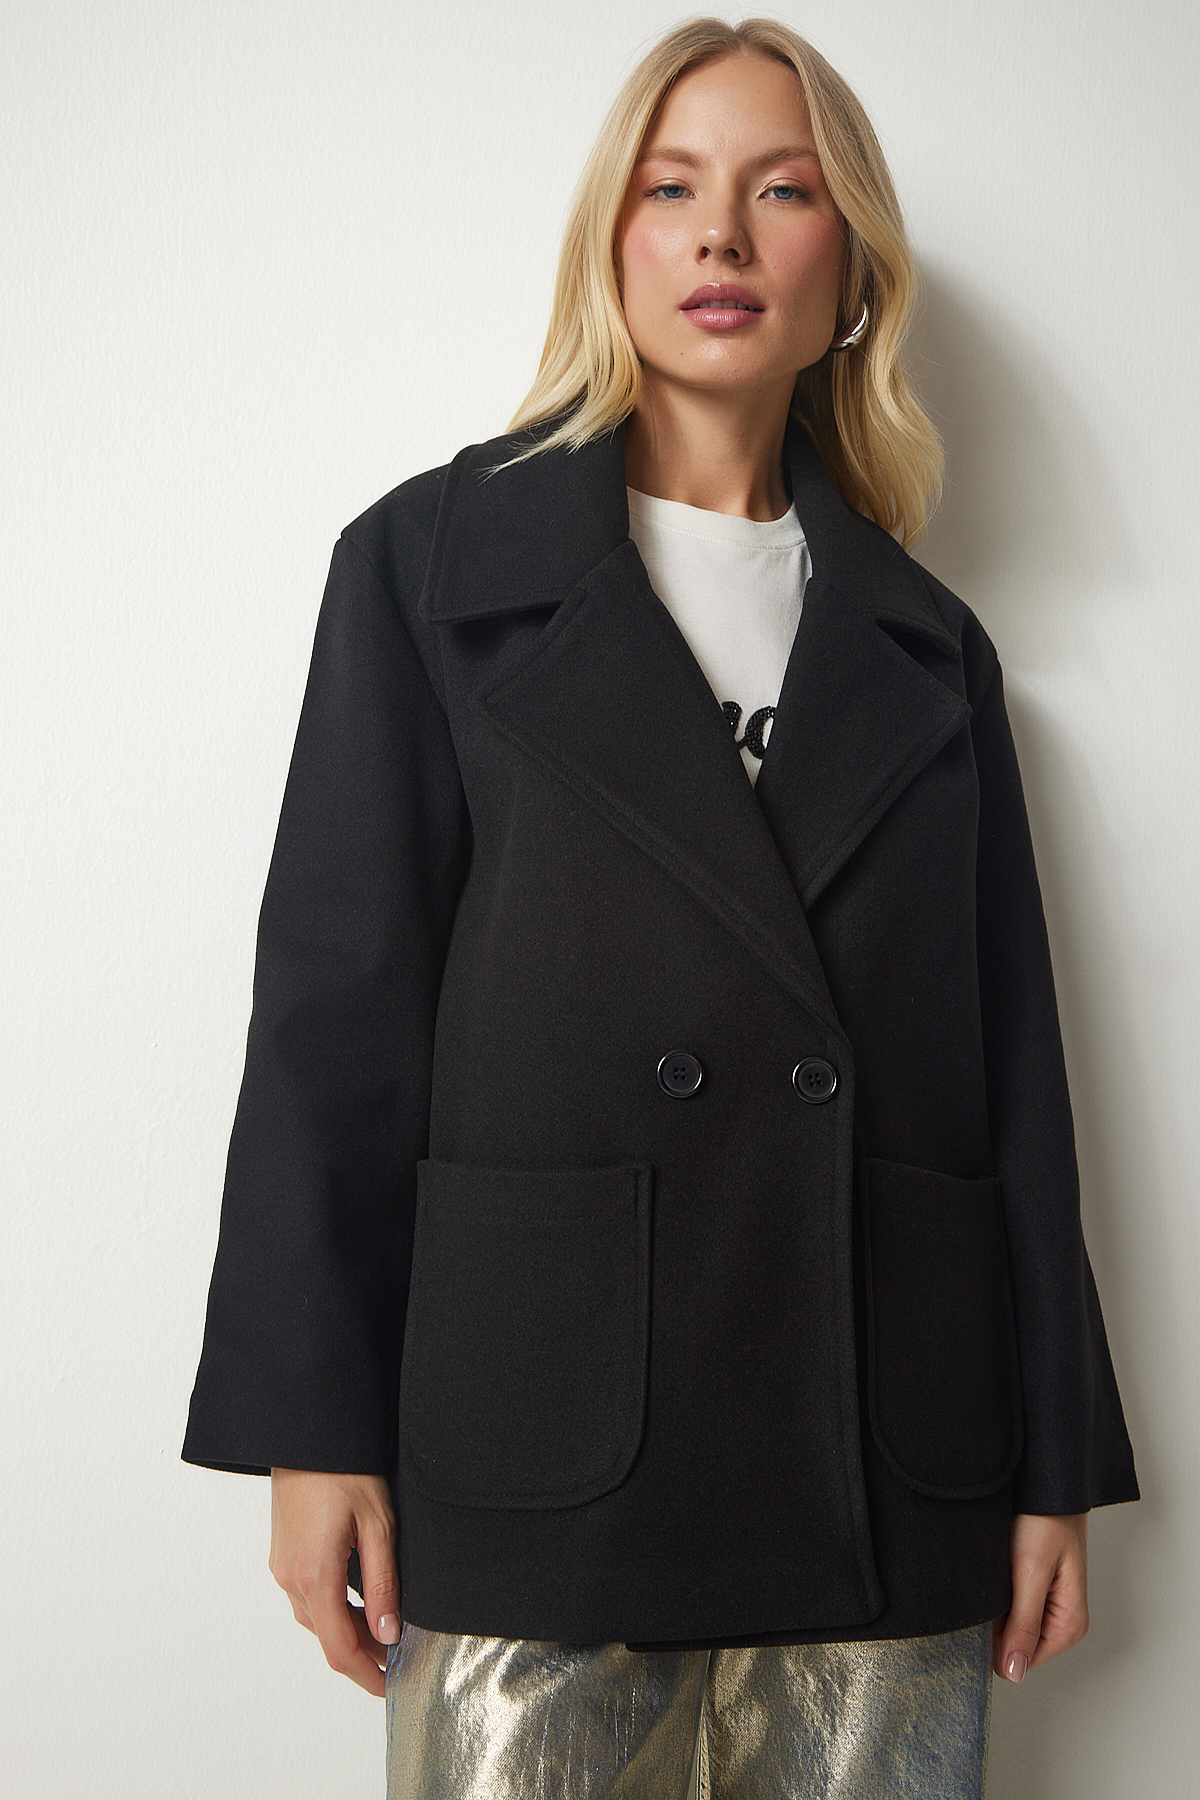 Happiness Istanbul Black Double Breasted Collar Coat with Pockets, Cachet